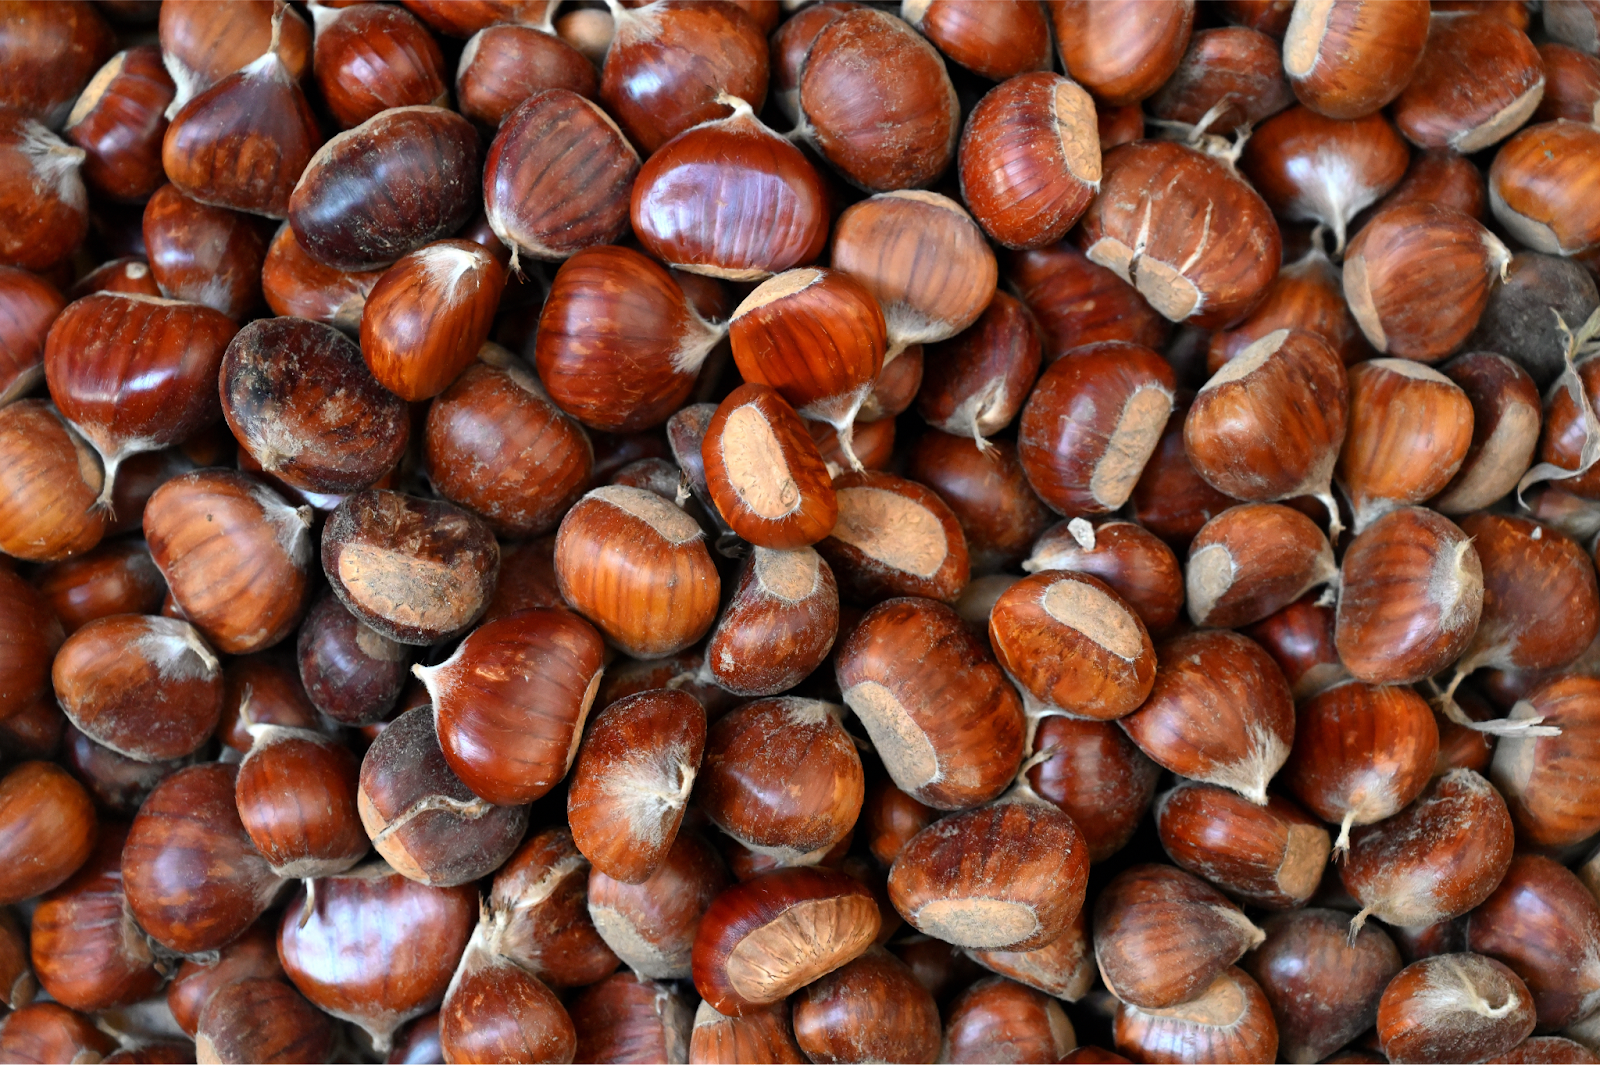 Japanese chestnuts piled up on top of each other.